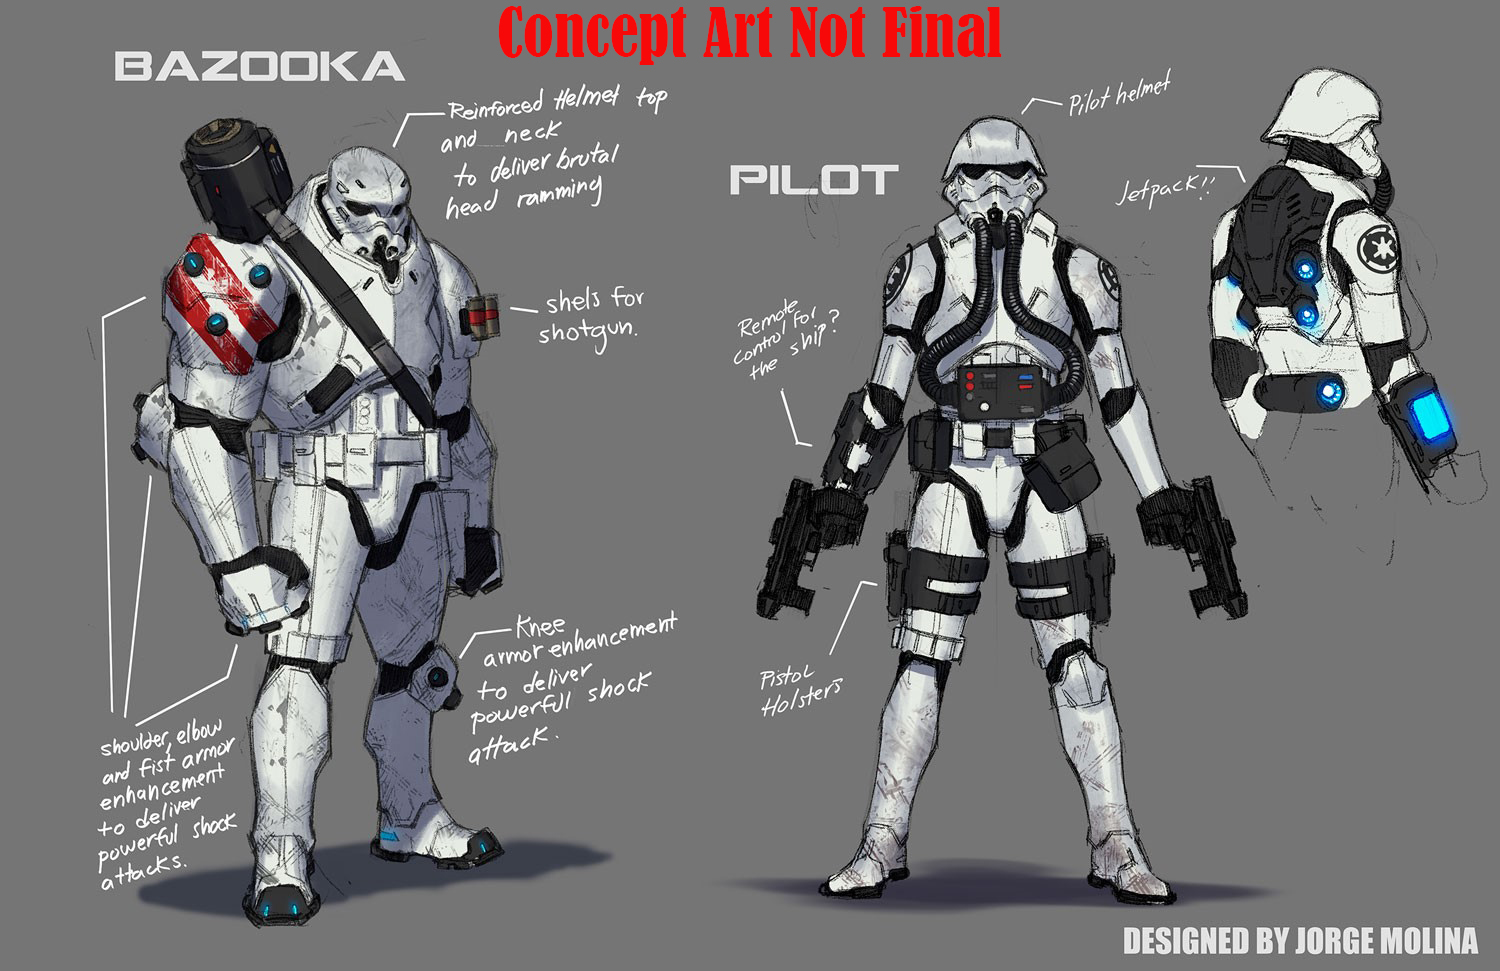 The Star Wars Comic’s New Stormtroopers Look Absurdly Awesome